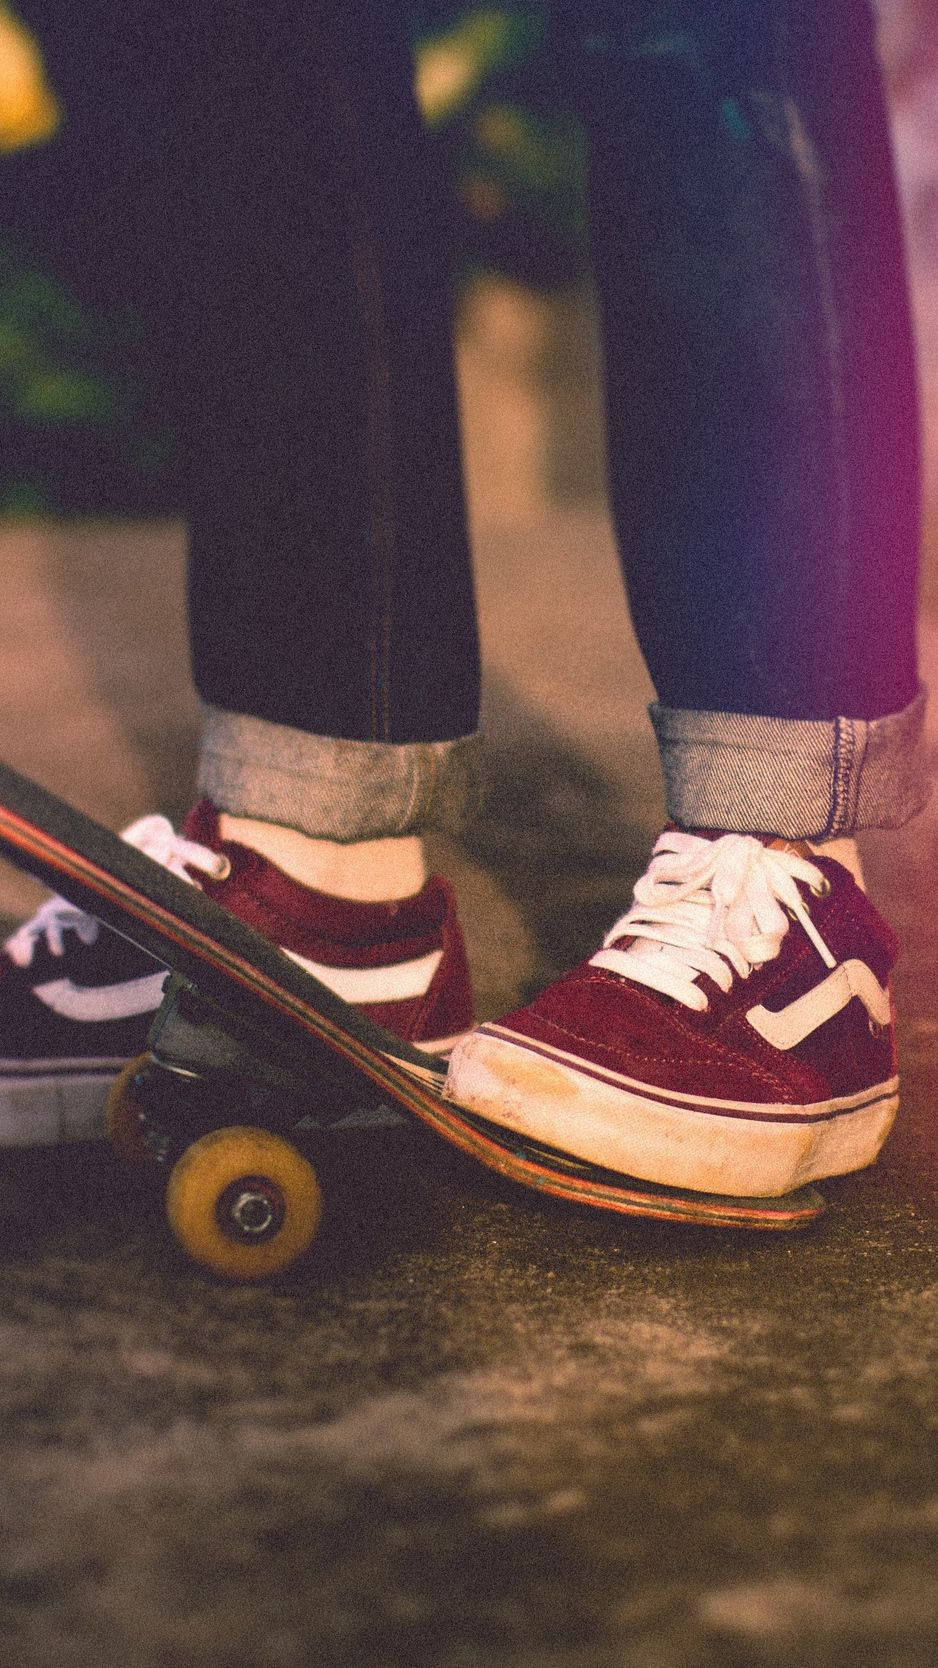 Maroon Vans Shoes With Skateboard Iphone Background